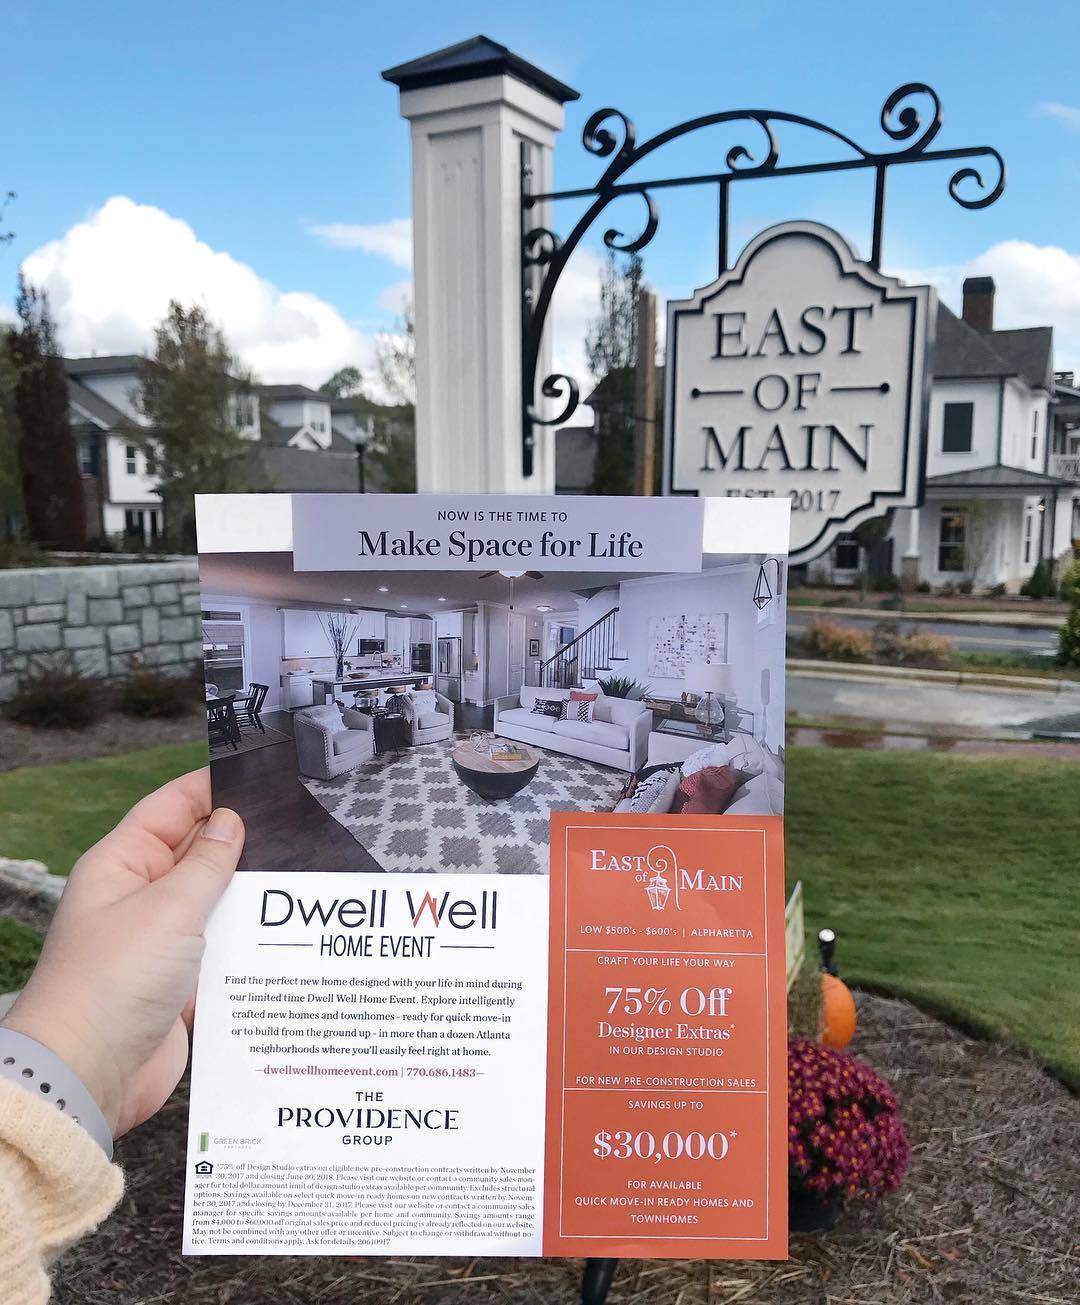 Dwell Well Home Event | Branding and Marketing Campaign by Clementine Creative Agency | Marietta, GA